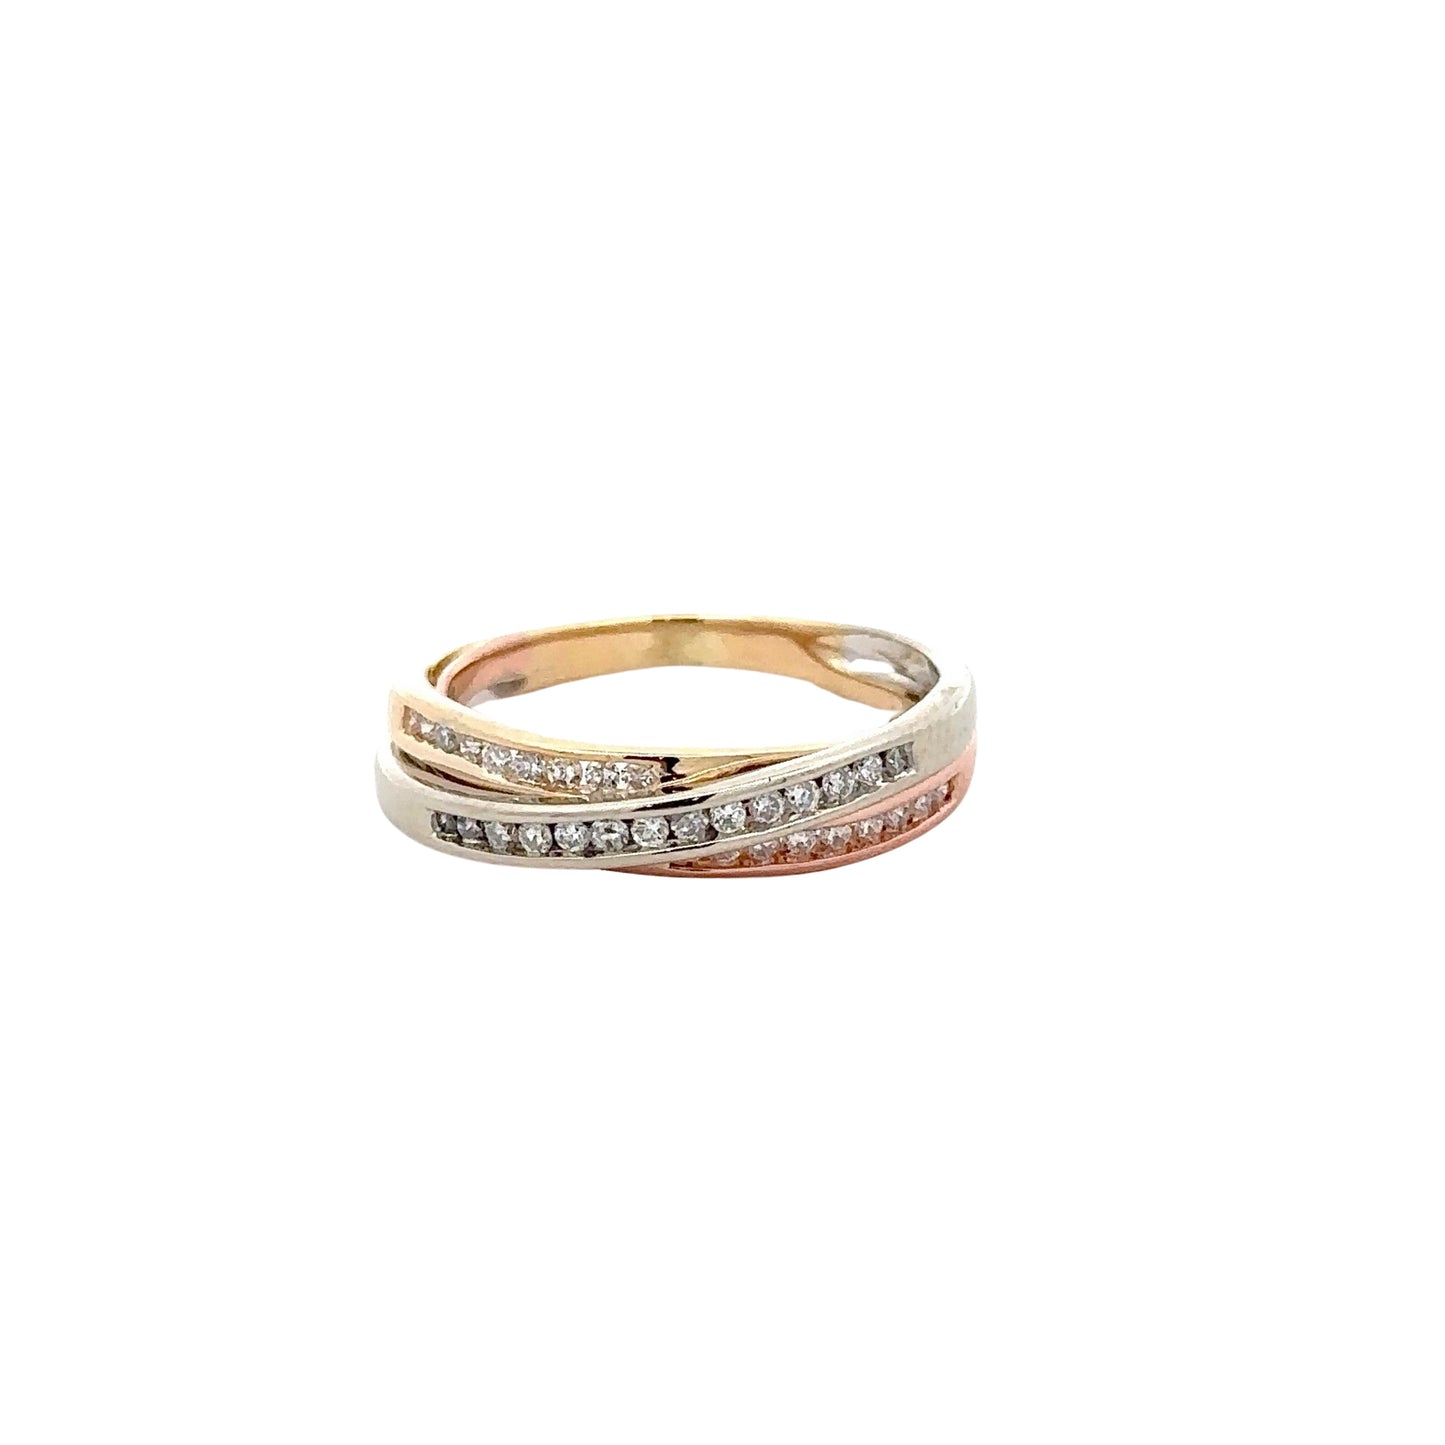 Tri-color gold crossover band ring with small round diamonds